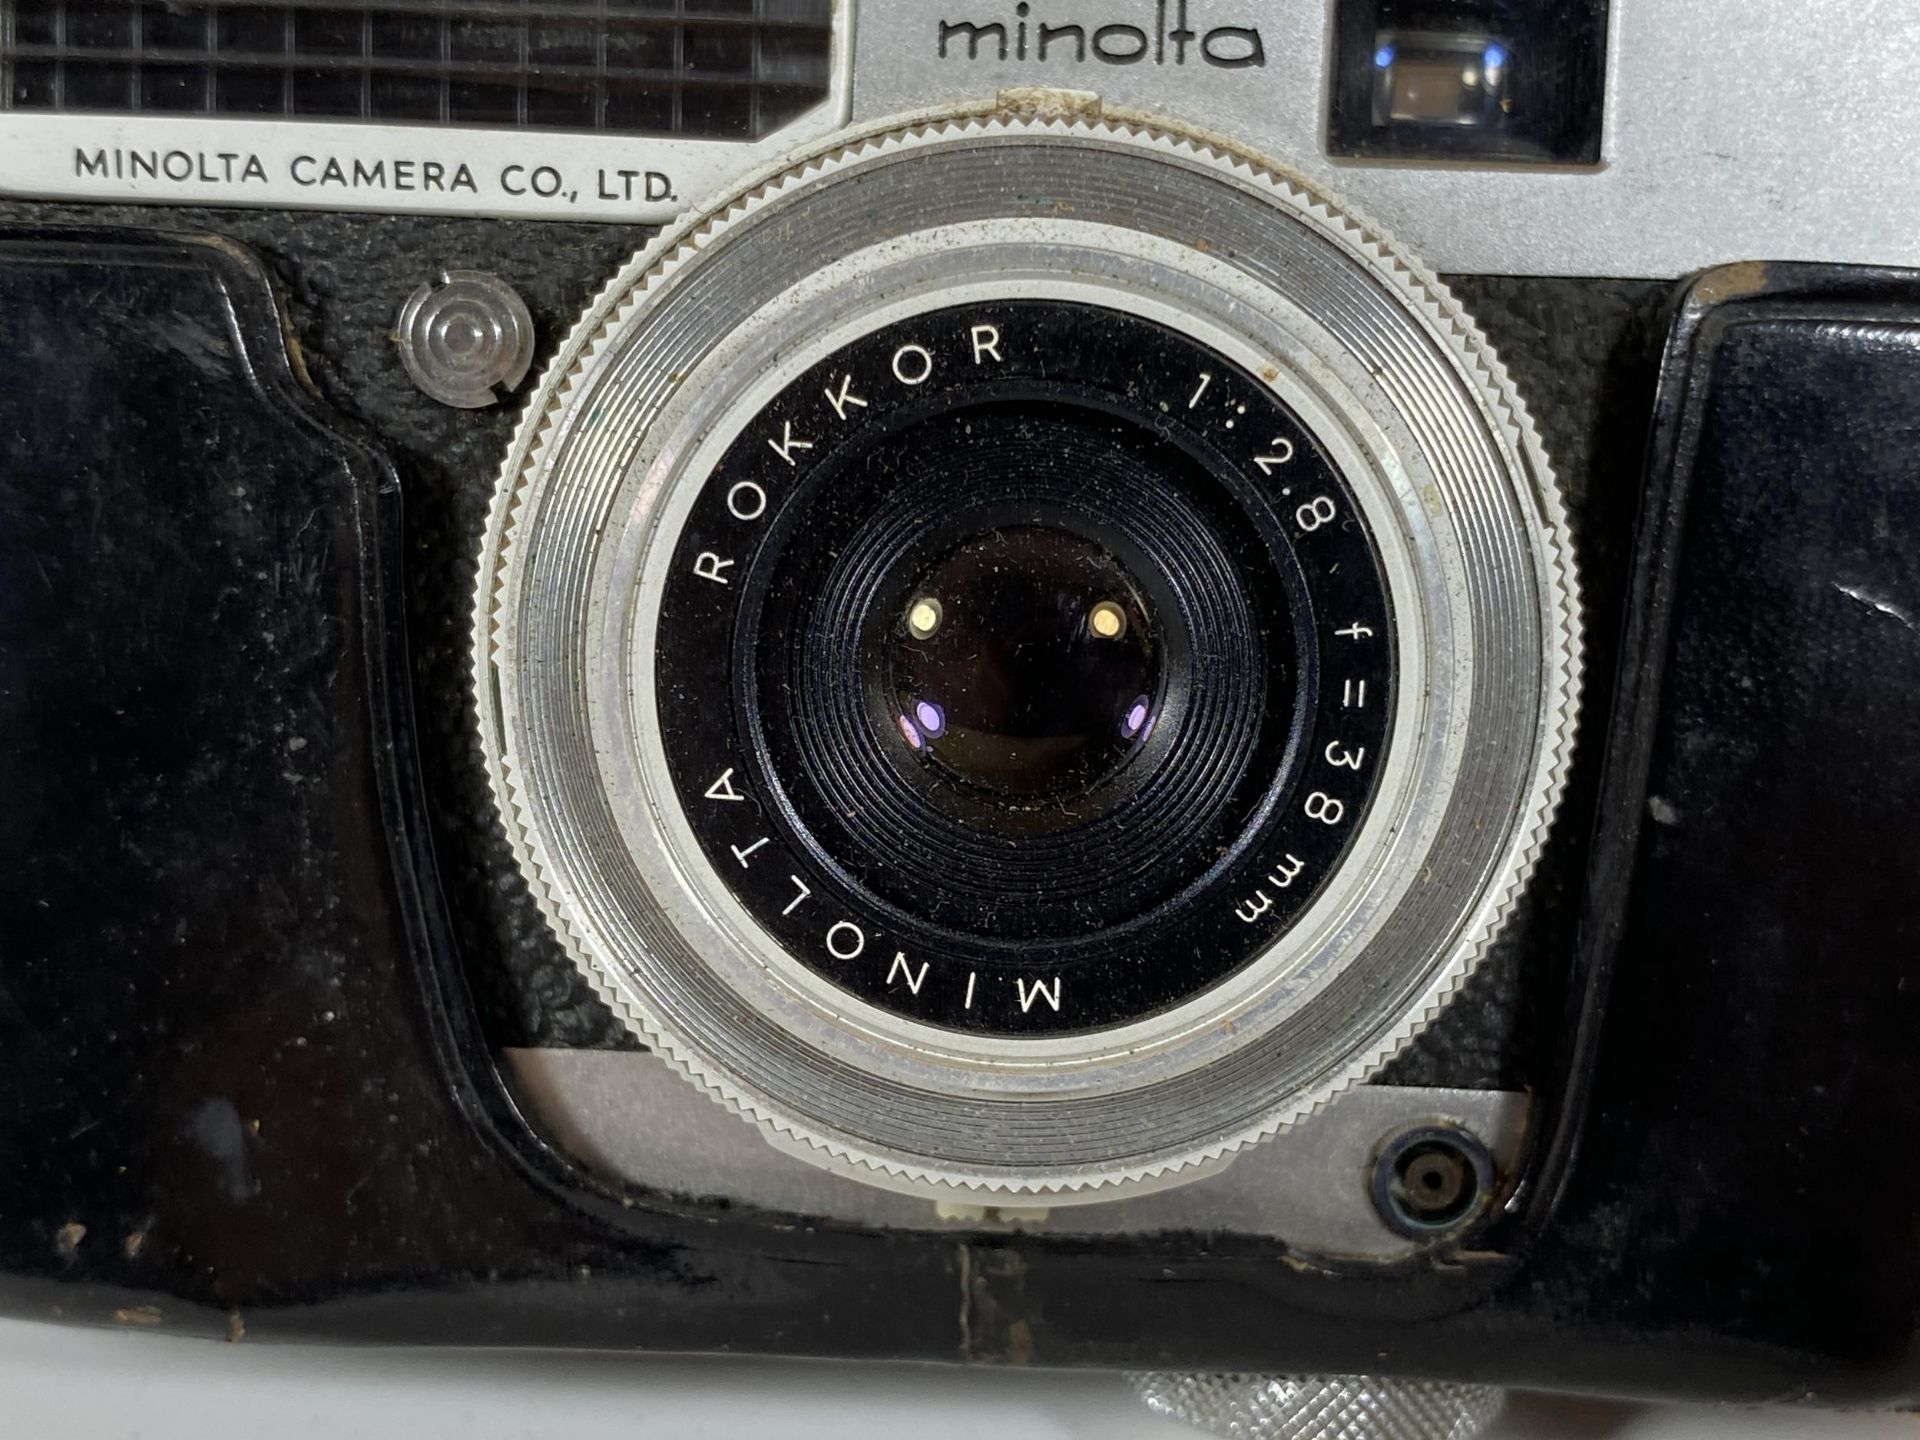 A VINTAGE CASED MINOLTA P CAMERA FITTED WITH ROKKOR 38MM LENS - Image 2 of 3